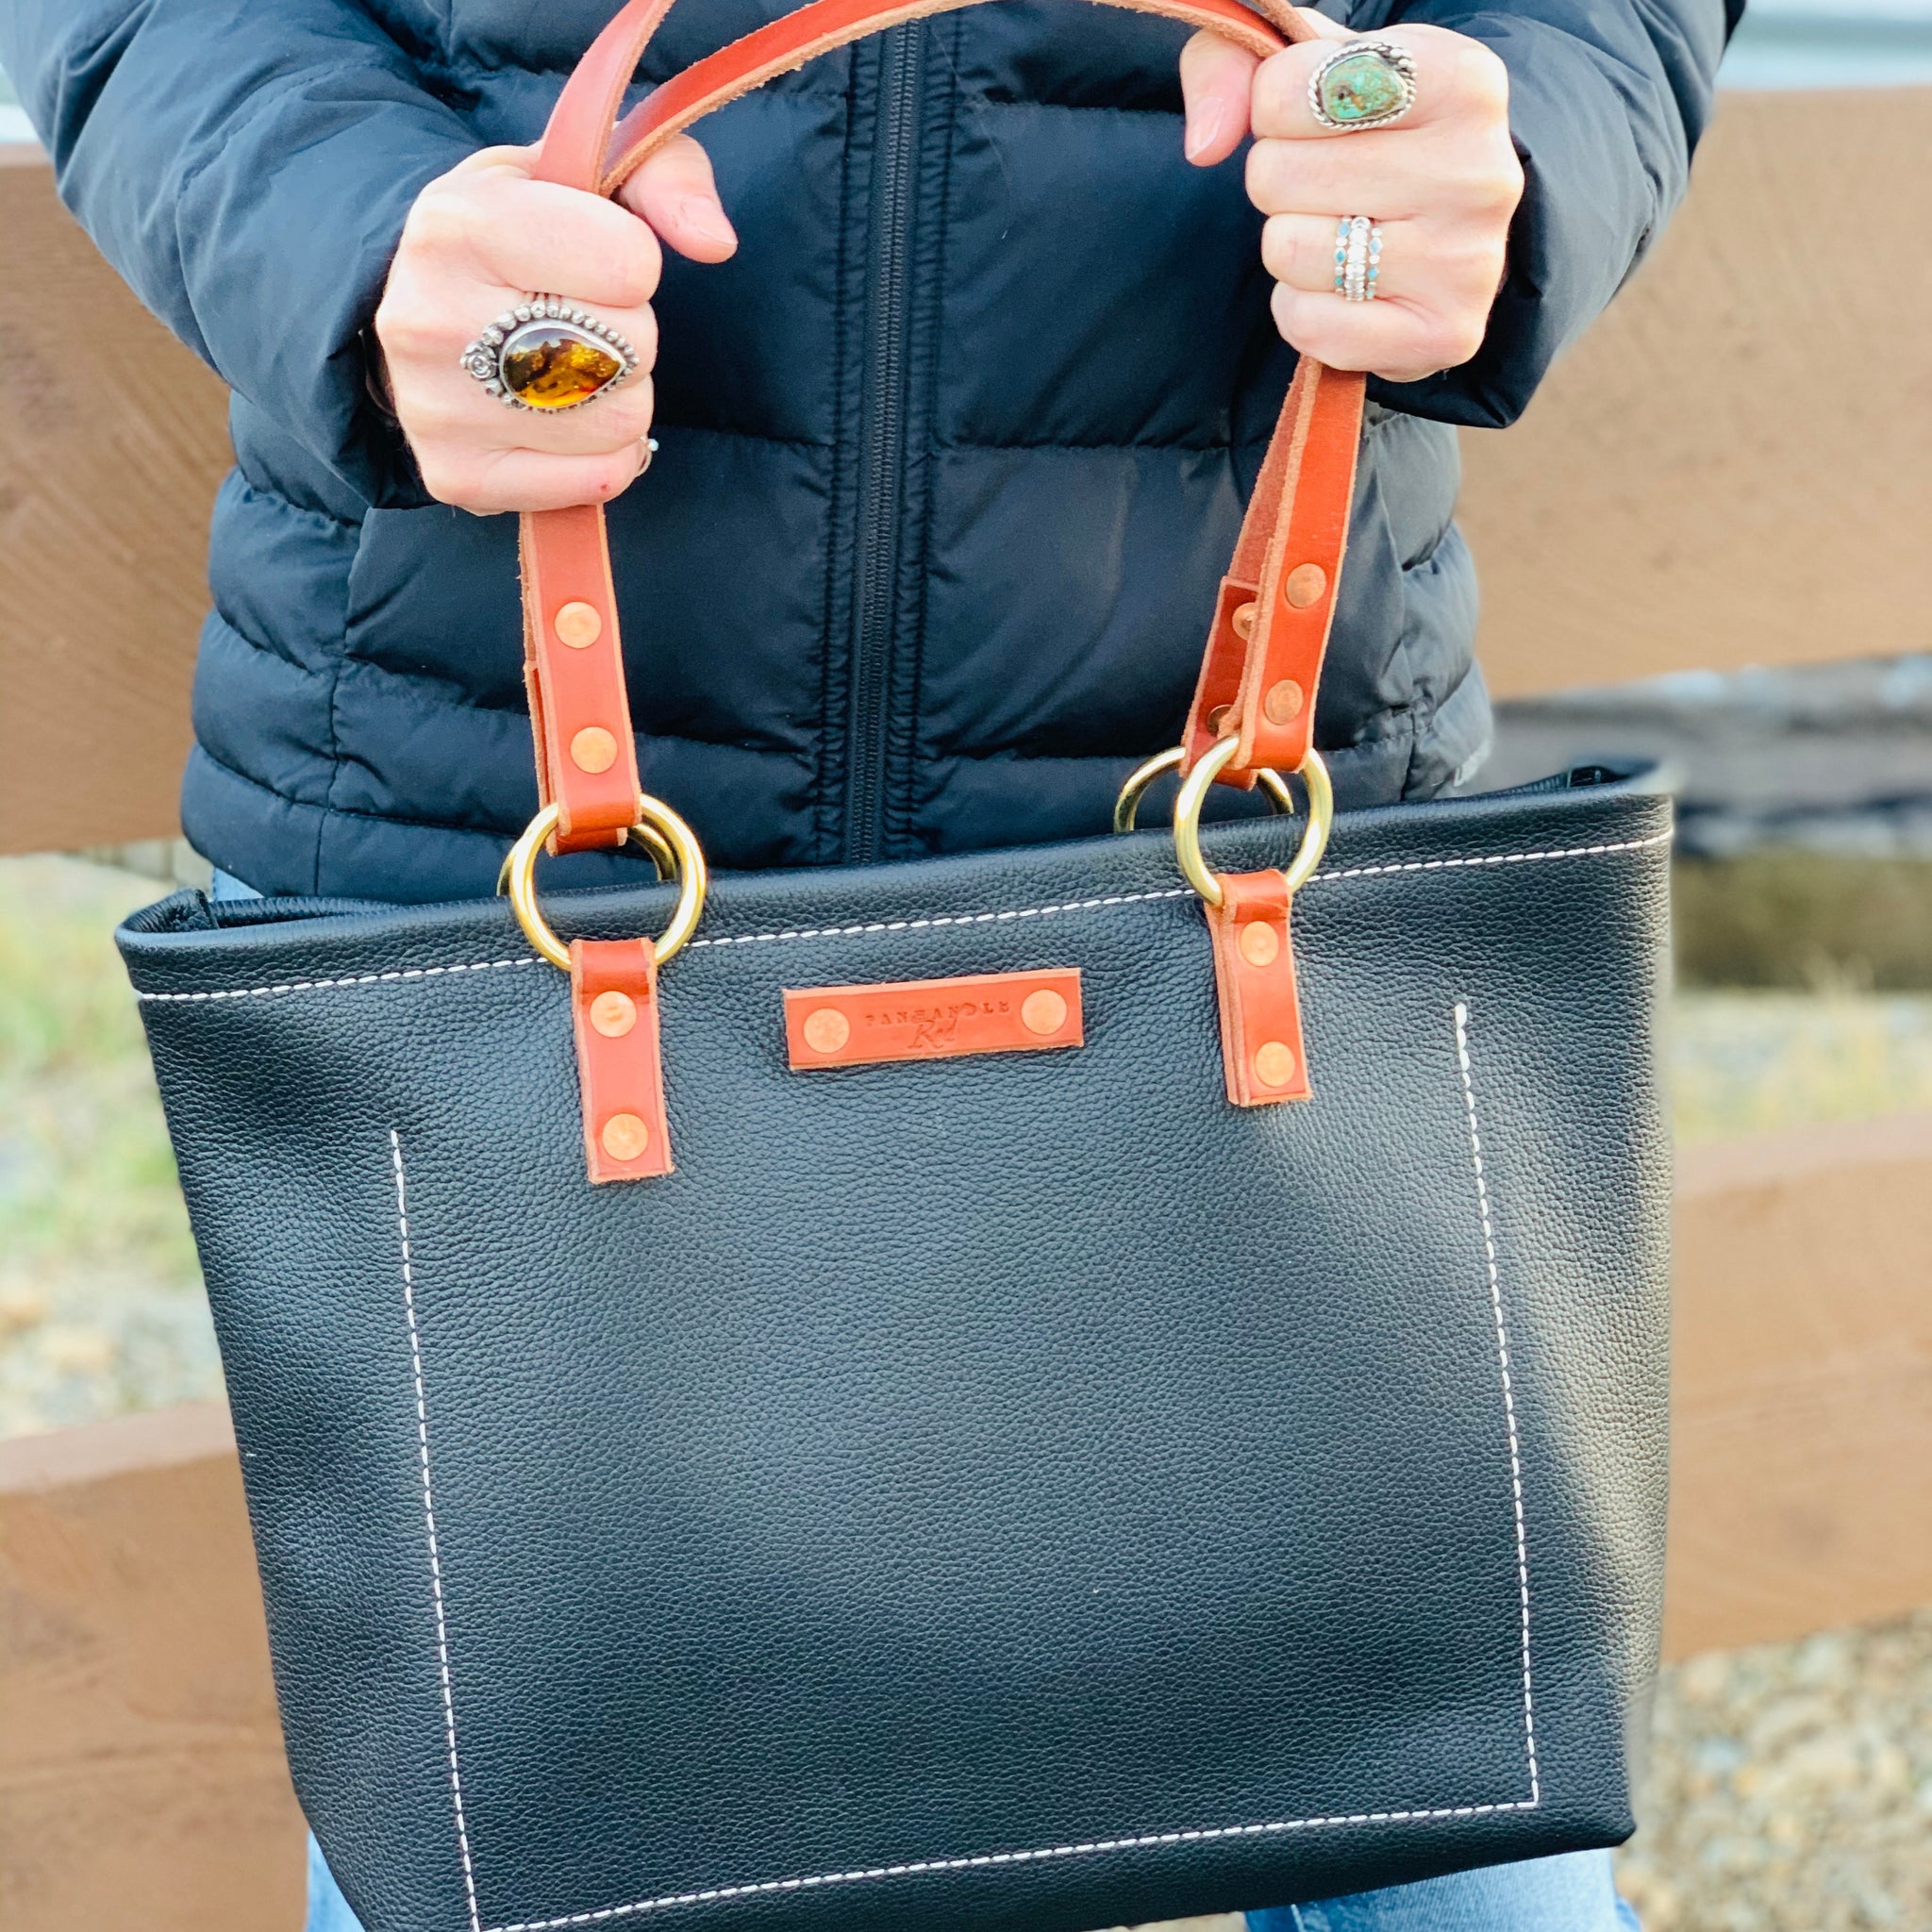 Black Leather Tote Bag, Black Leather Bag, Leather Products, Gift Shop, Duffle Bag, Work Bag, Panhandle Red Company specializing in Leather Goods, Handbags, Totes, Purses, Everyday Carry Needs, and more. Full-grain leather items, custom gifts, all Handcrafted in Idaho, USA.